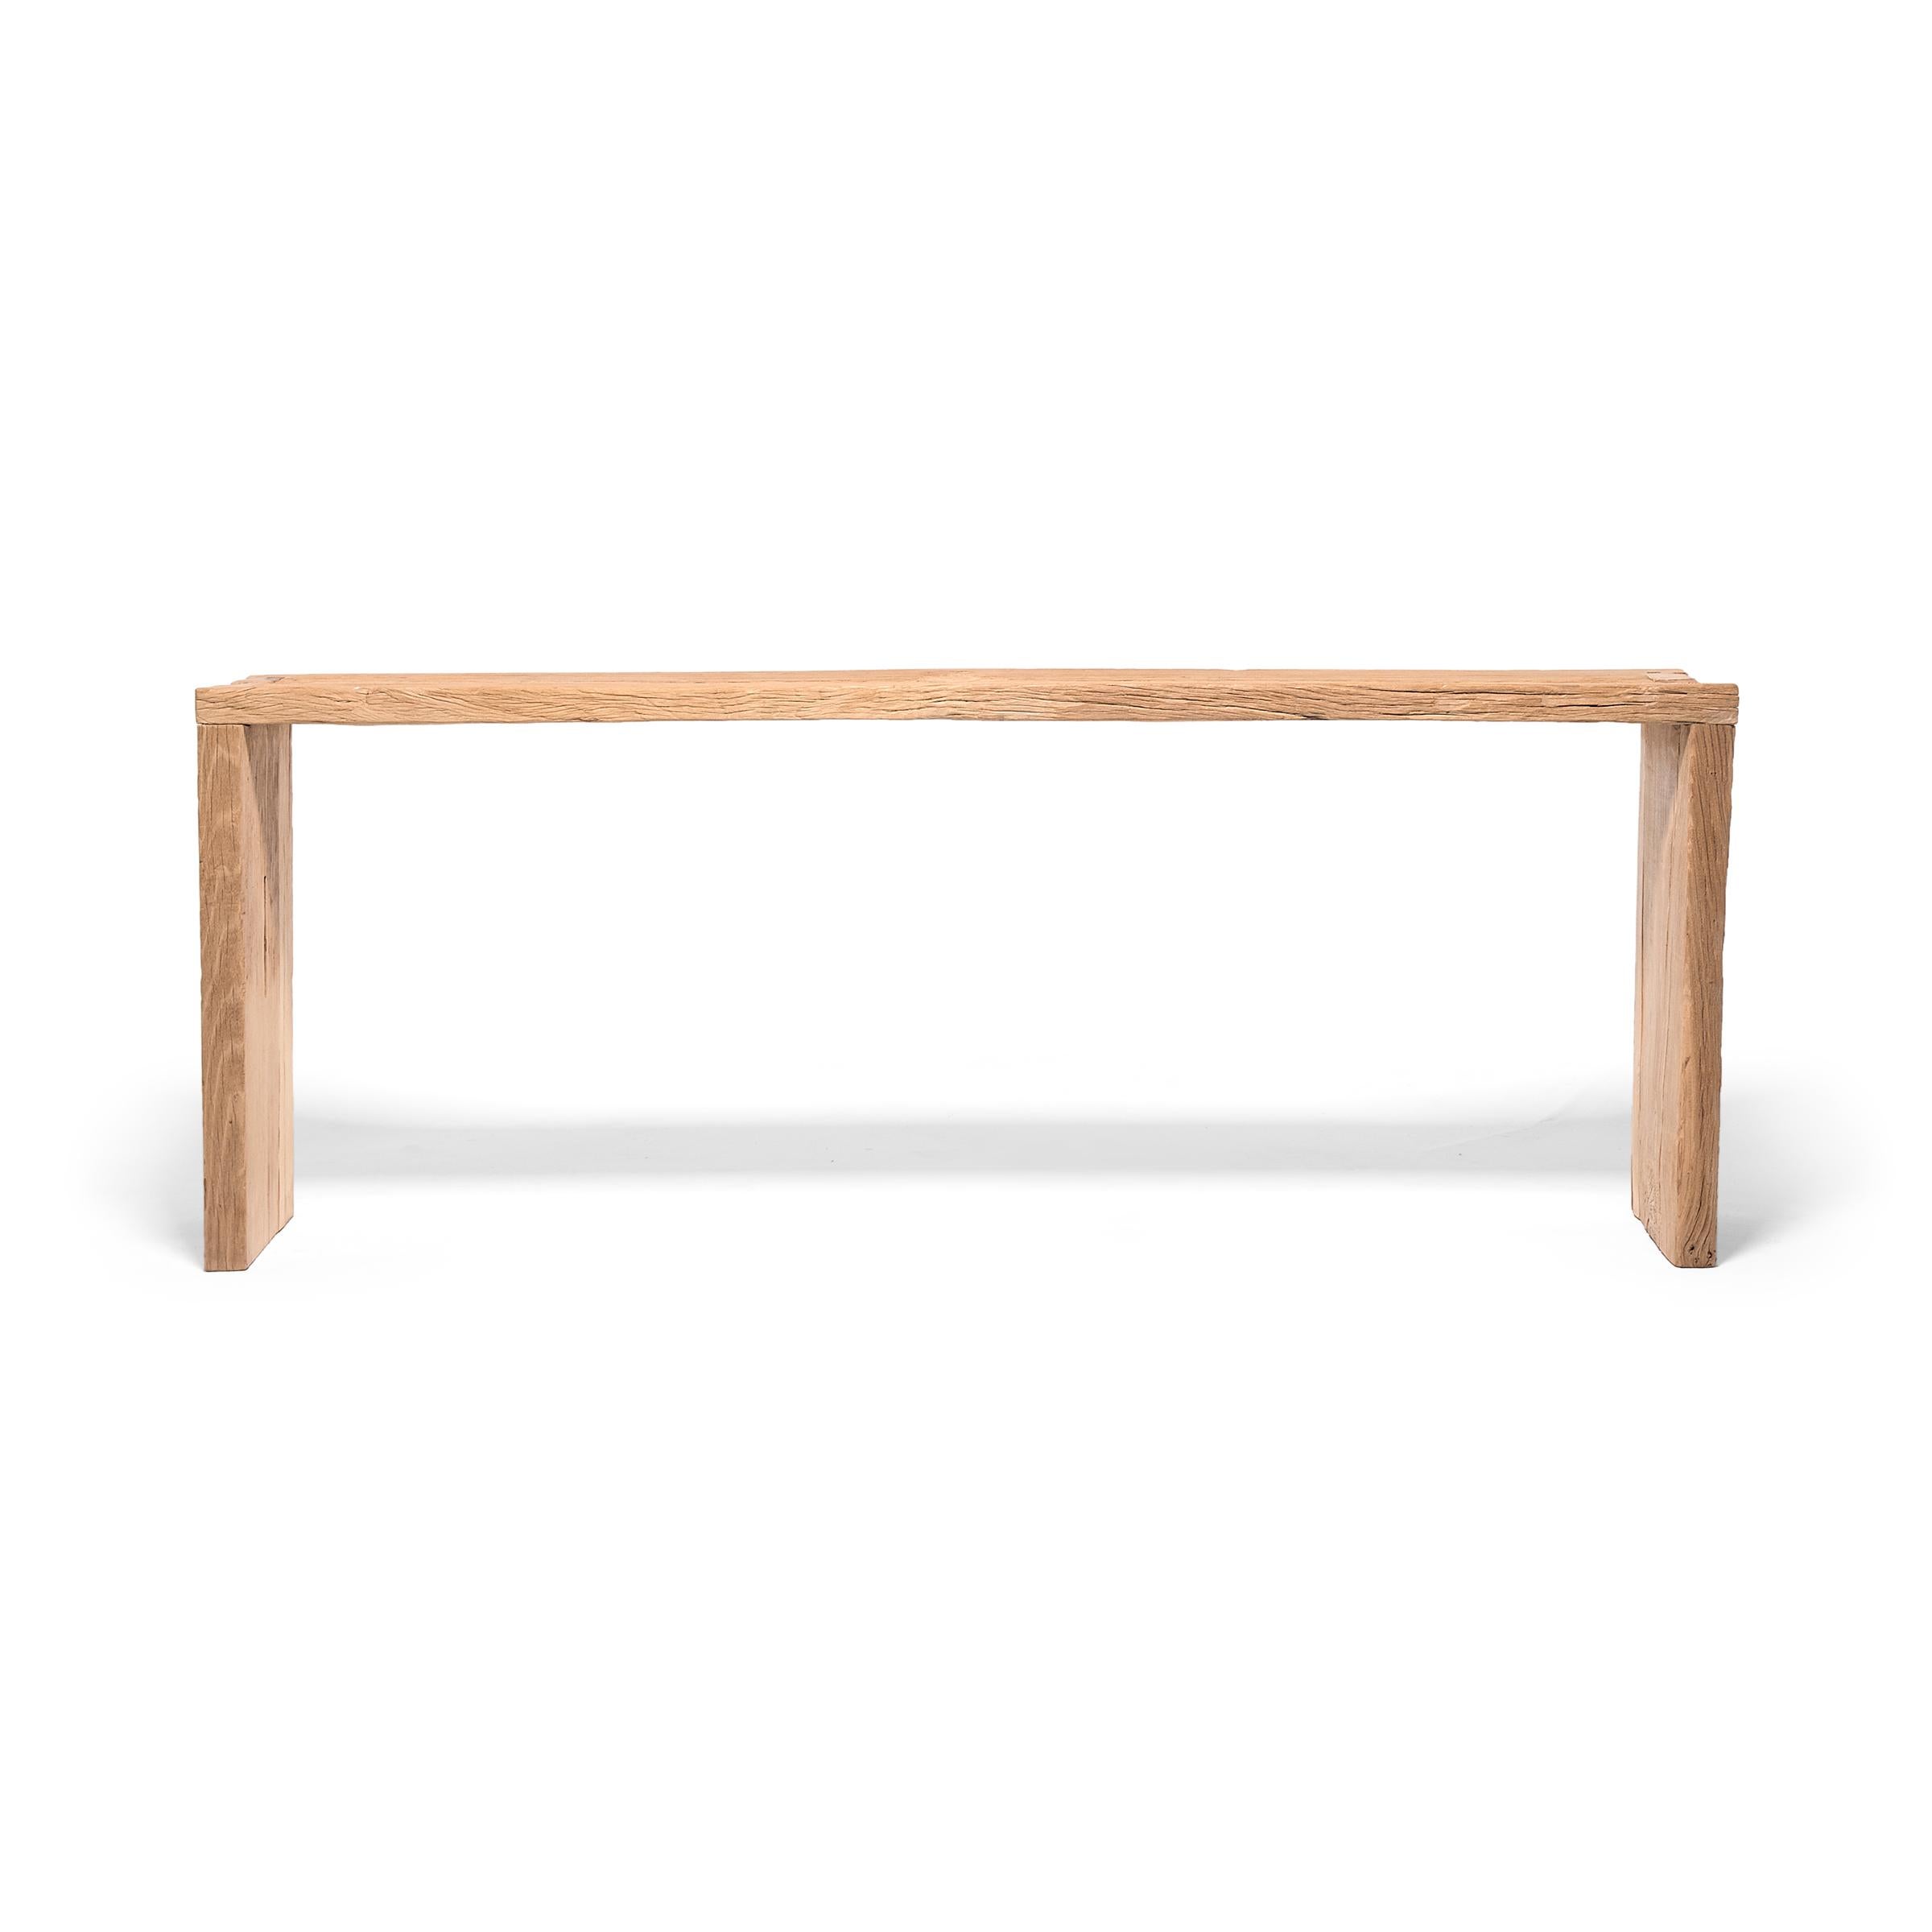 Made of wood reclaimed from Qing-dynasty architecture, this contemporary altar table is a celebration of wabi-sabi style. In the spirit of traditional Chinese joinery, the corners are finished with dovetail joints for a modern waterfall design. The